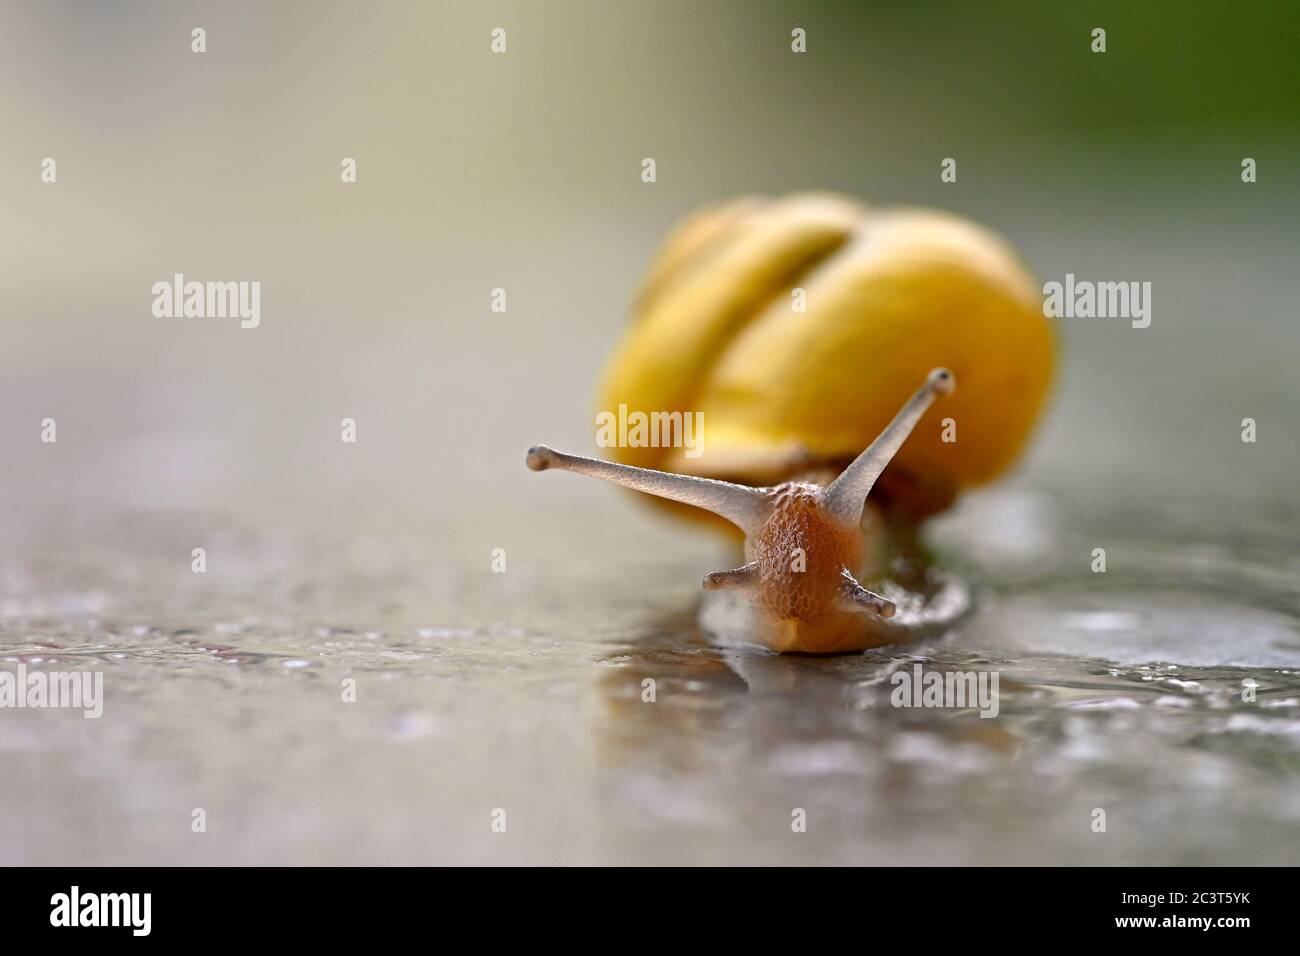 Beautiful macro shot of a snail with a shell Stock Photo